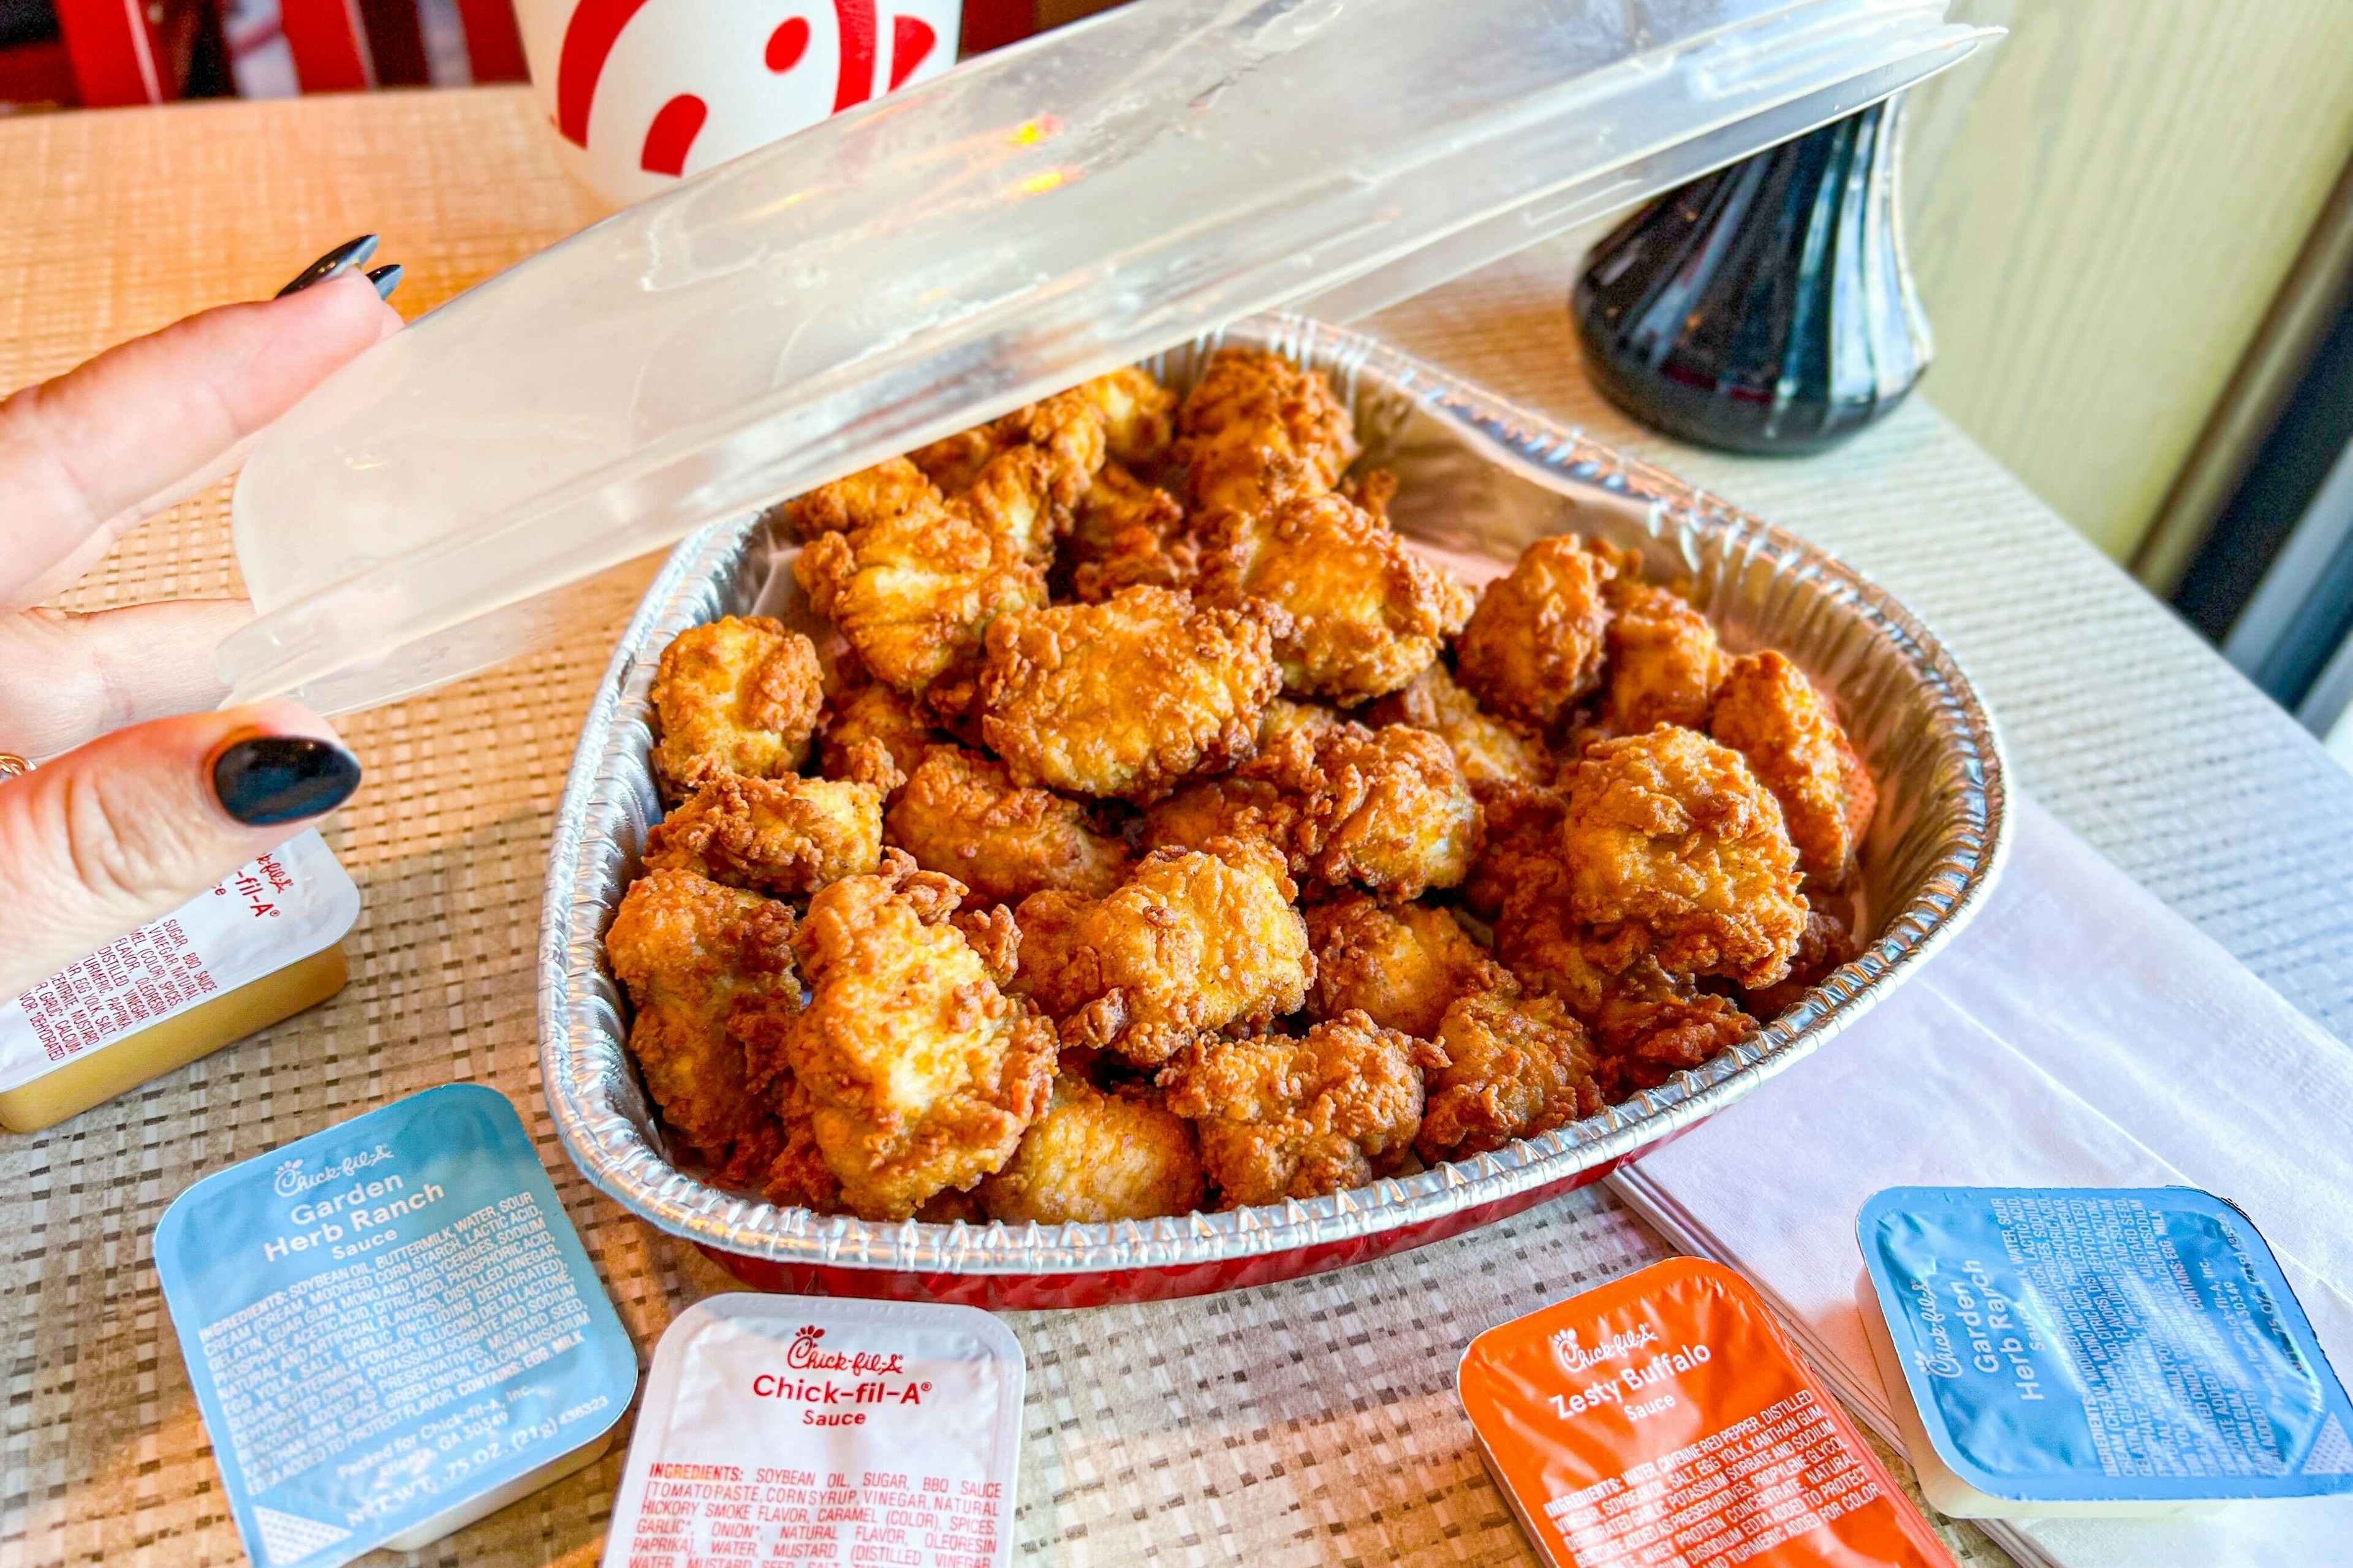 chick-fil-a-valentines-day-heart-tray-chicken-nuggets-kcl-01